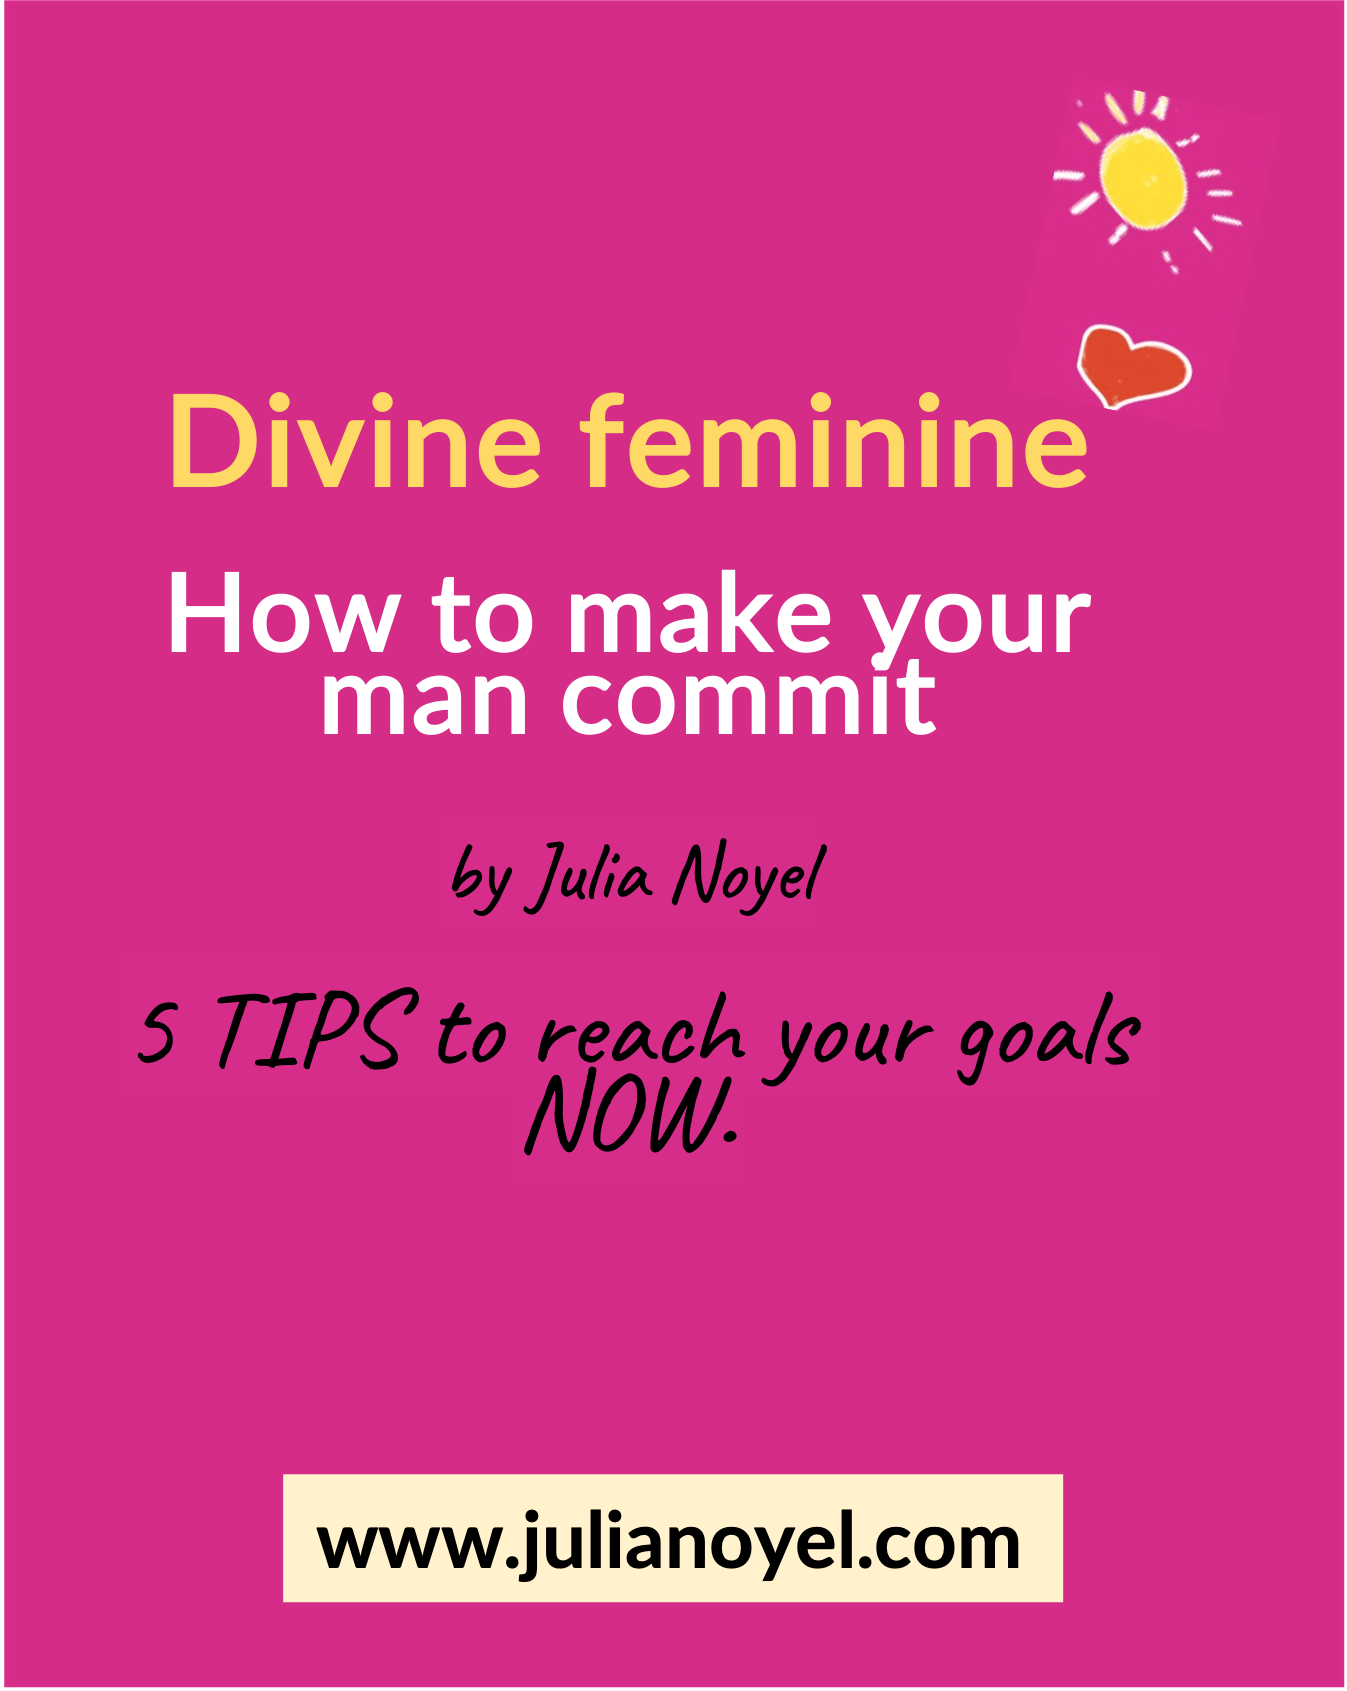 Divine feminine how to make your man commit by Julia Noyel